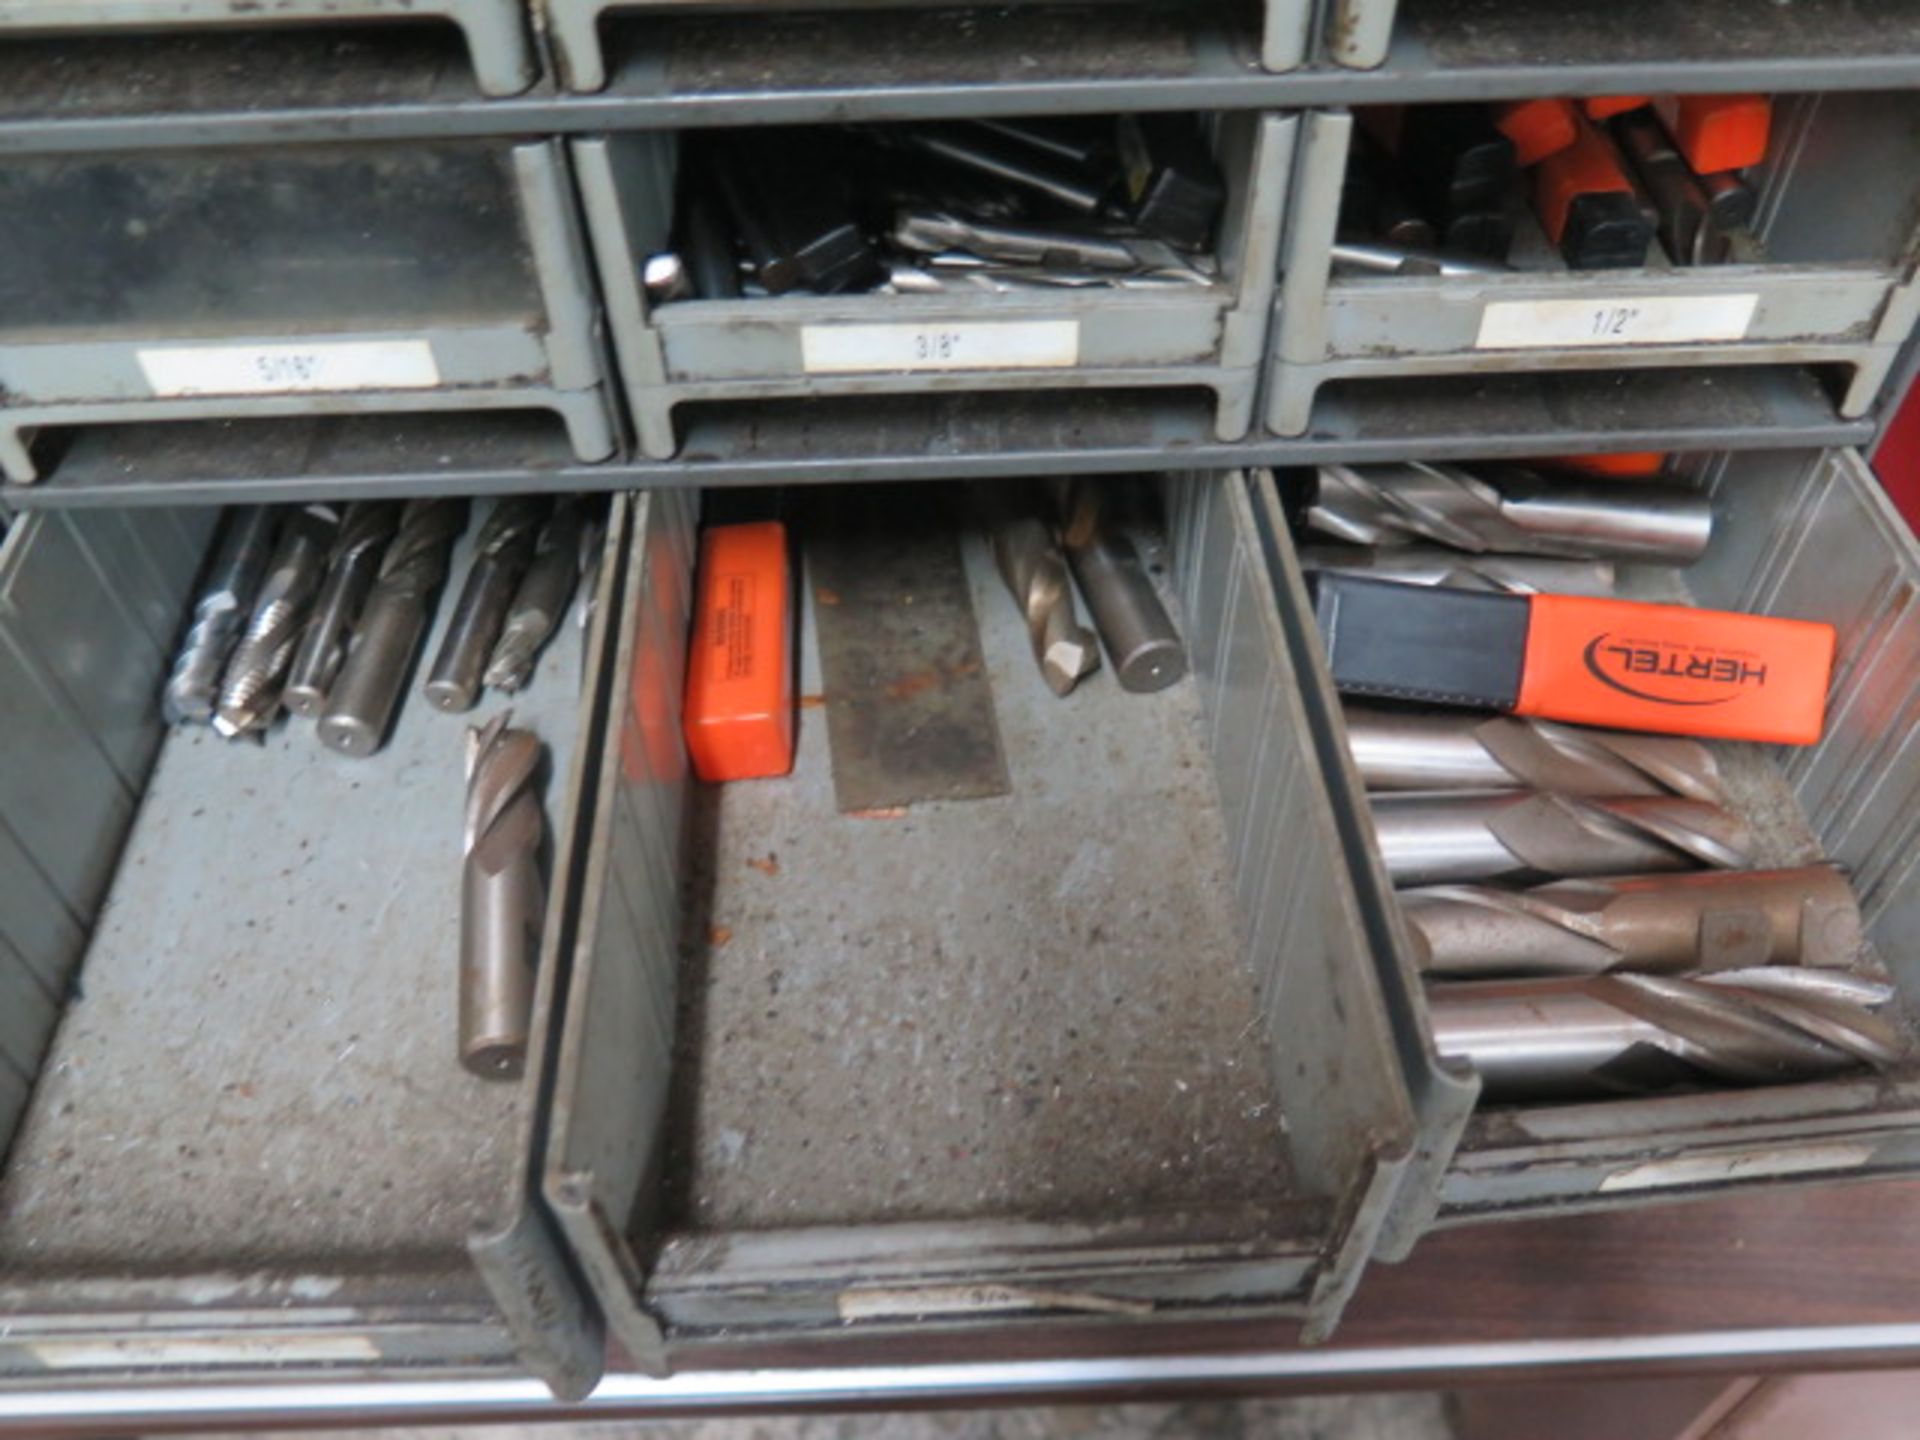 Carbide and High Speed Endmills, Carbide Inserts, Mill Slot Cutters and Hardware w/ Cabinets (SOLD - Image 4 of 8